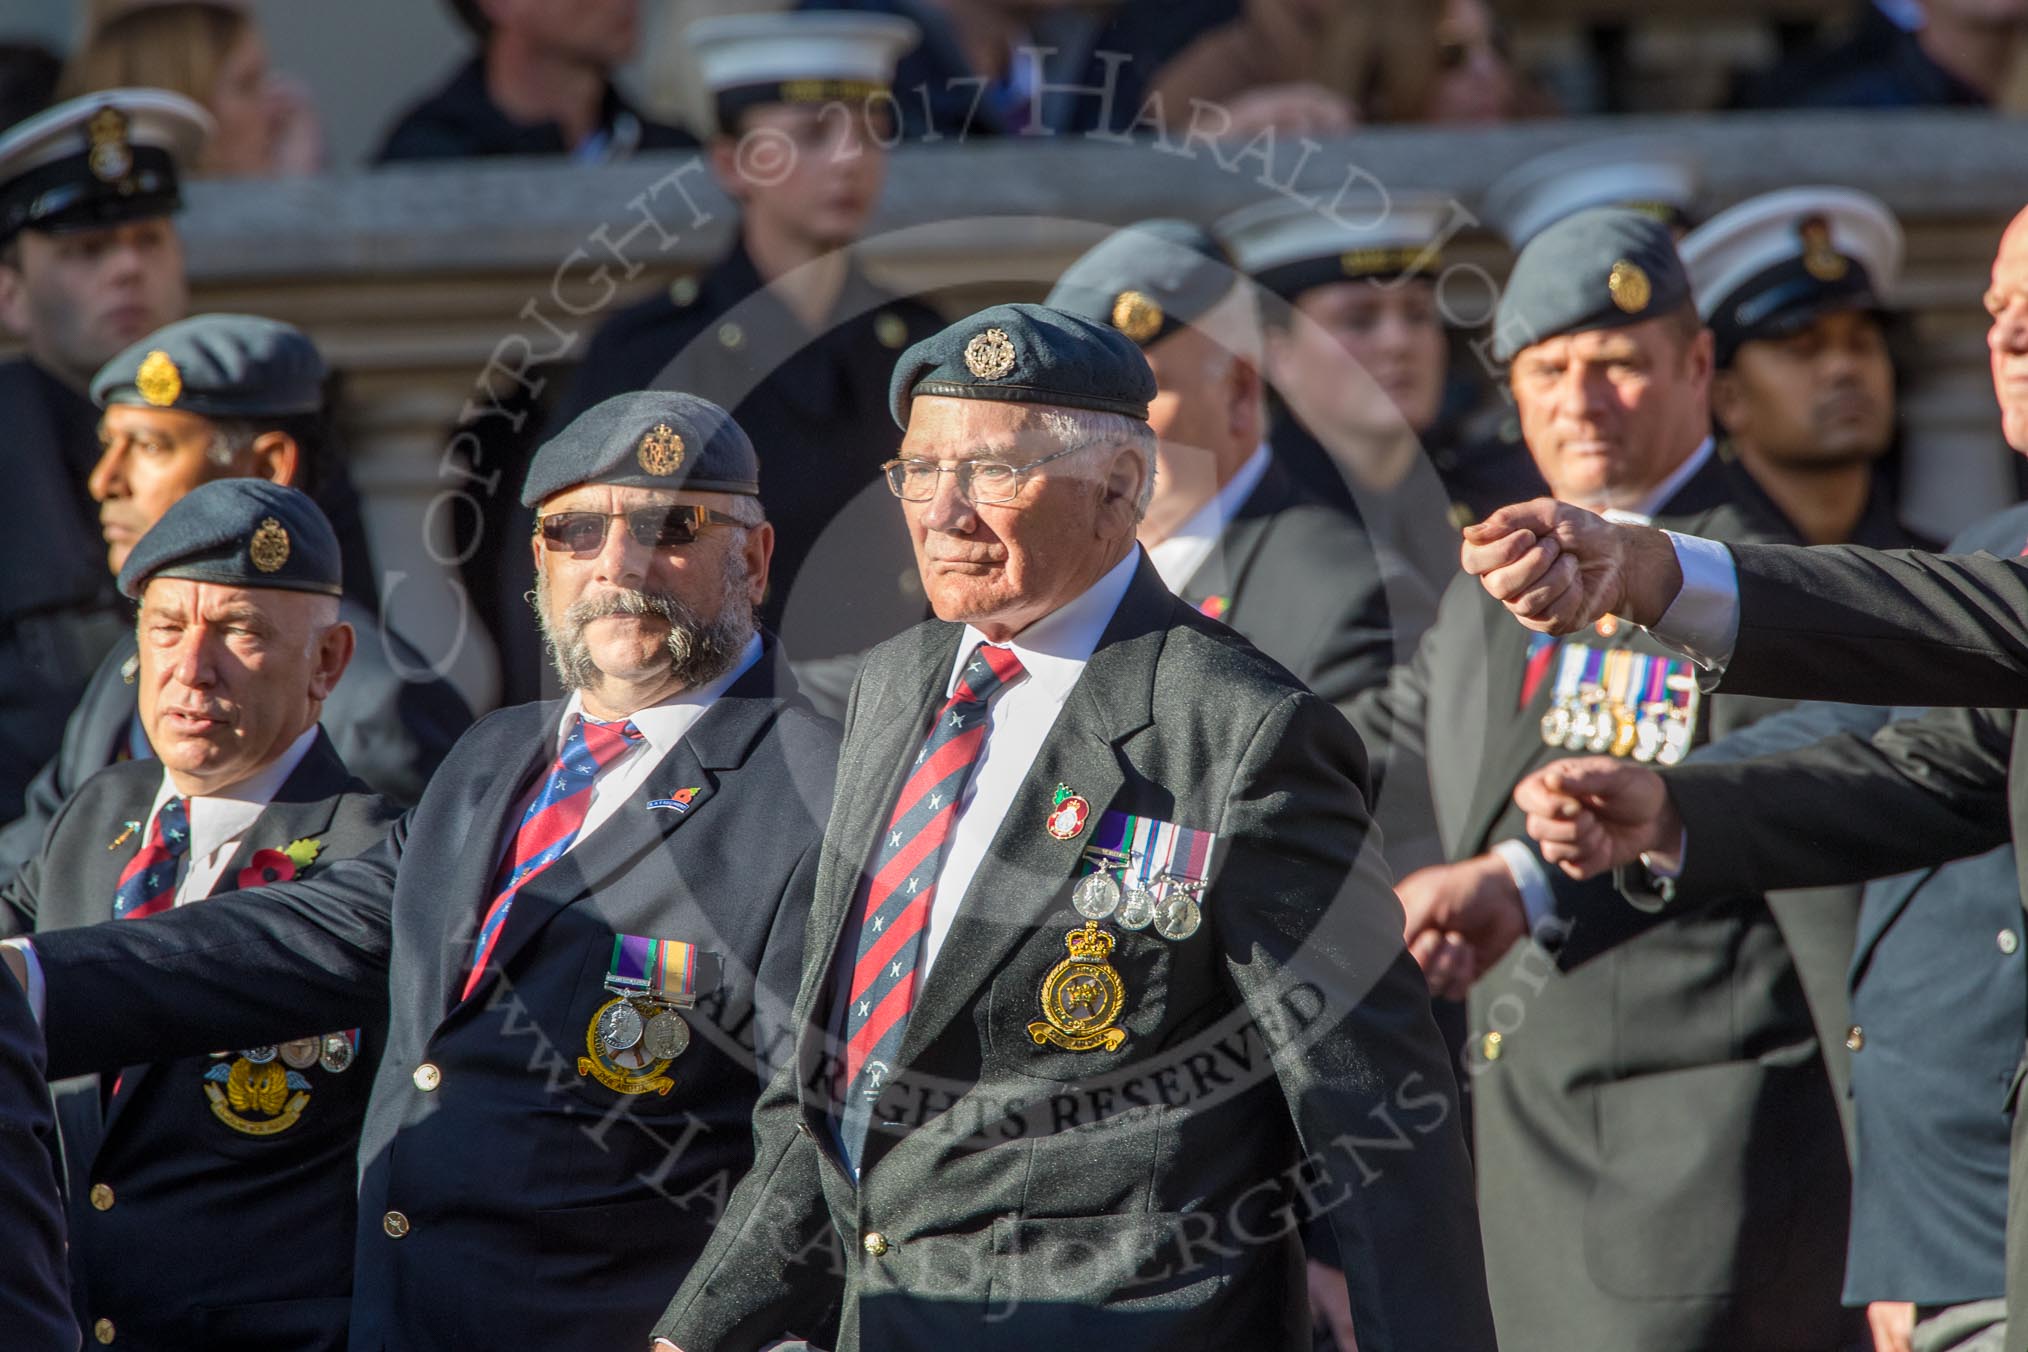 Royal Air Force Regiment Association (Group C3, 175 members) during the Royal British Legion March Past on Remembrance Sunday at the Cenotaph, Whitehall, Westminster, London, 11 November 2018, 12:15.